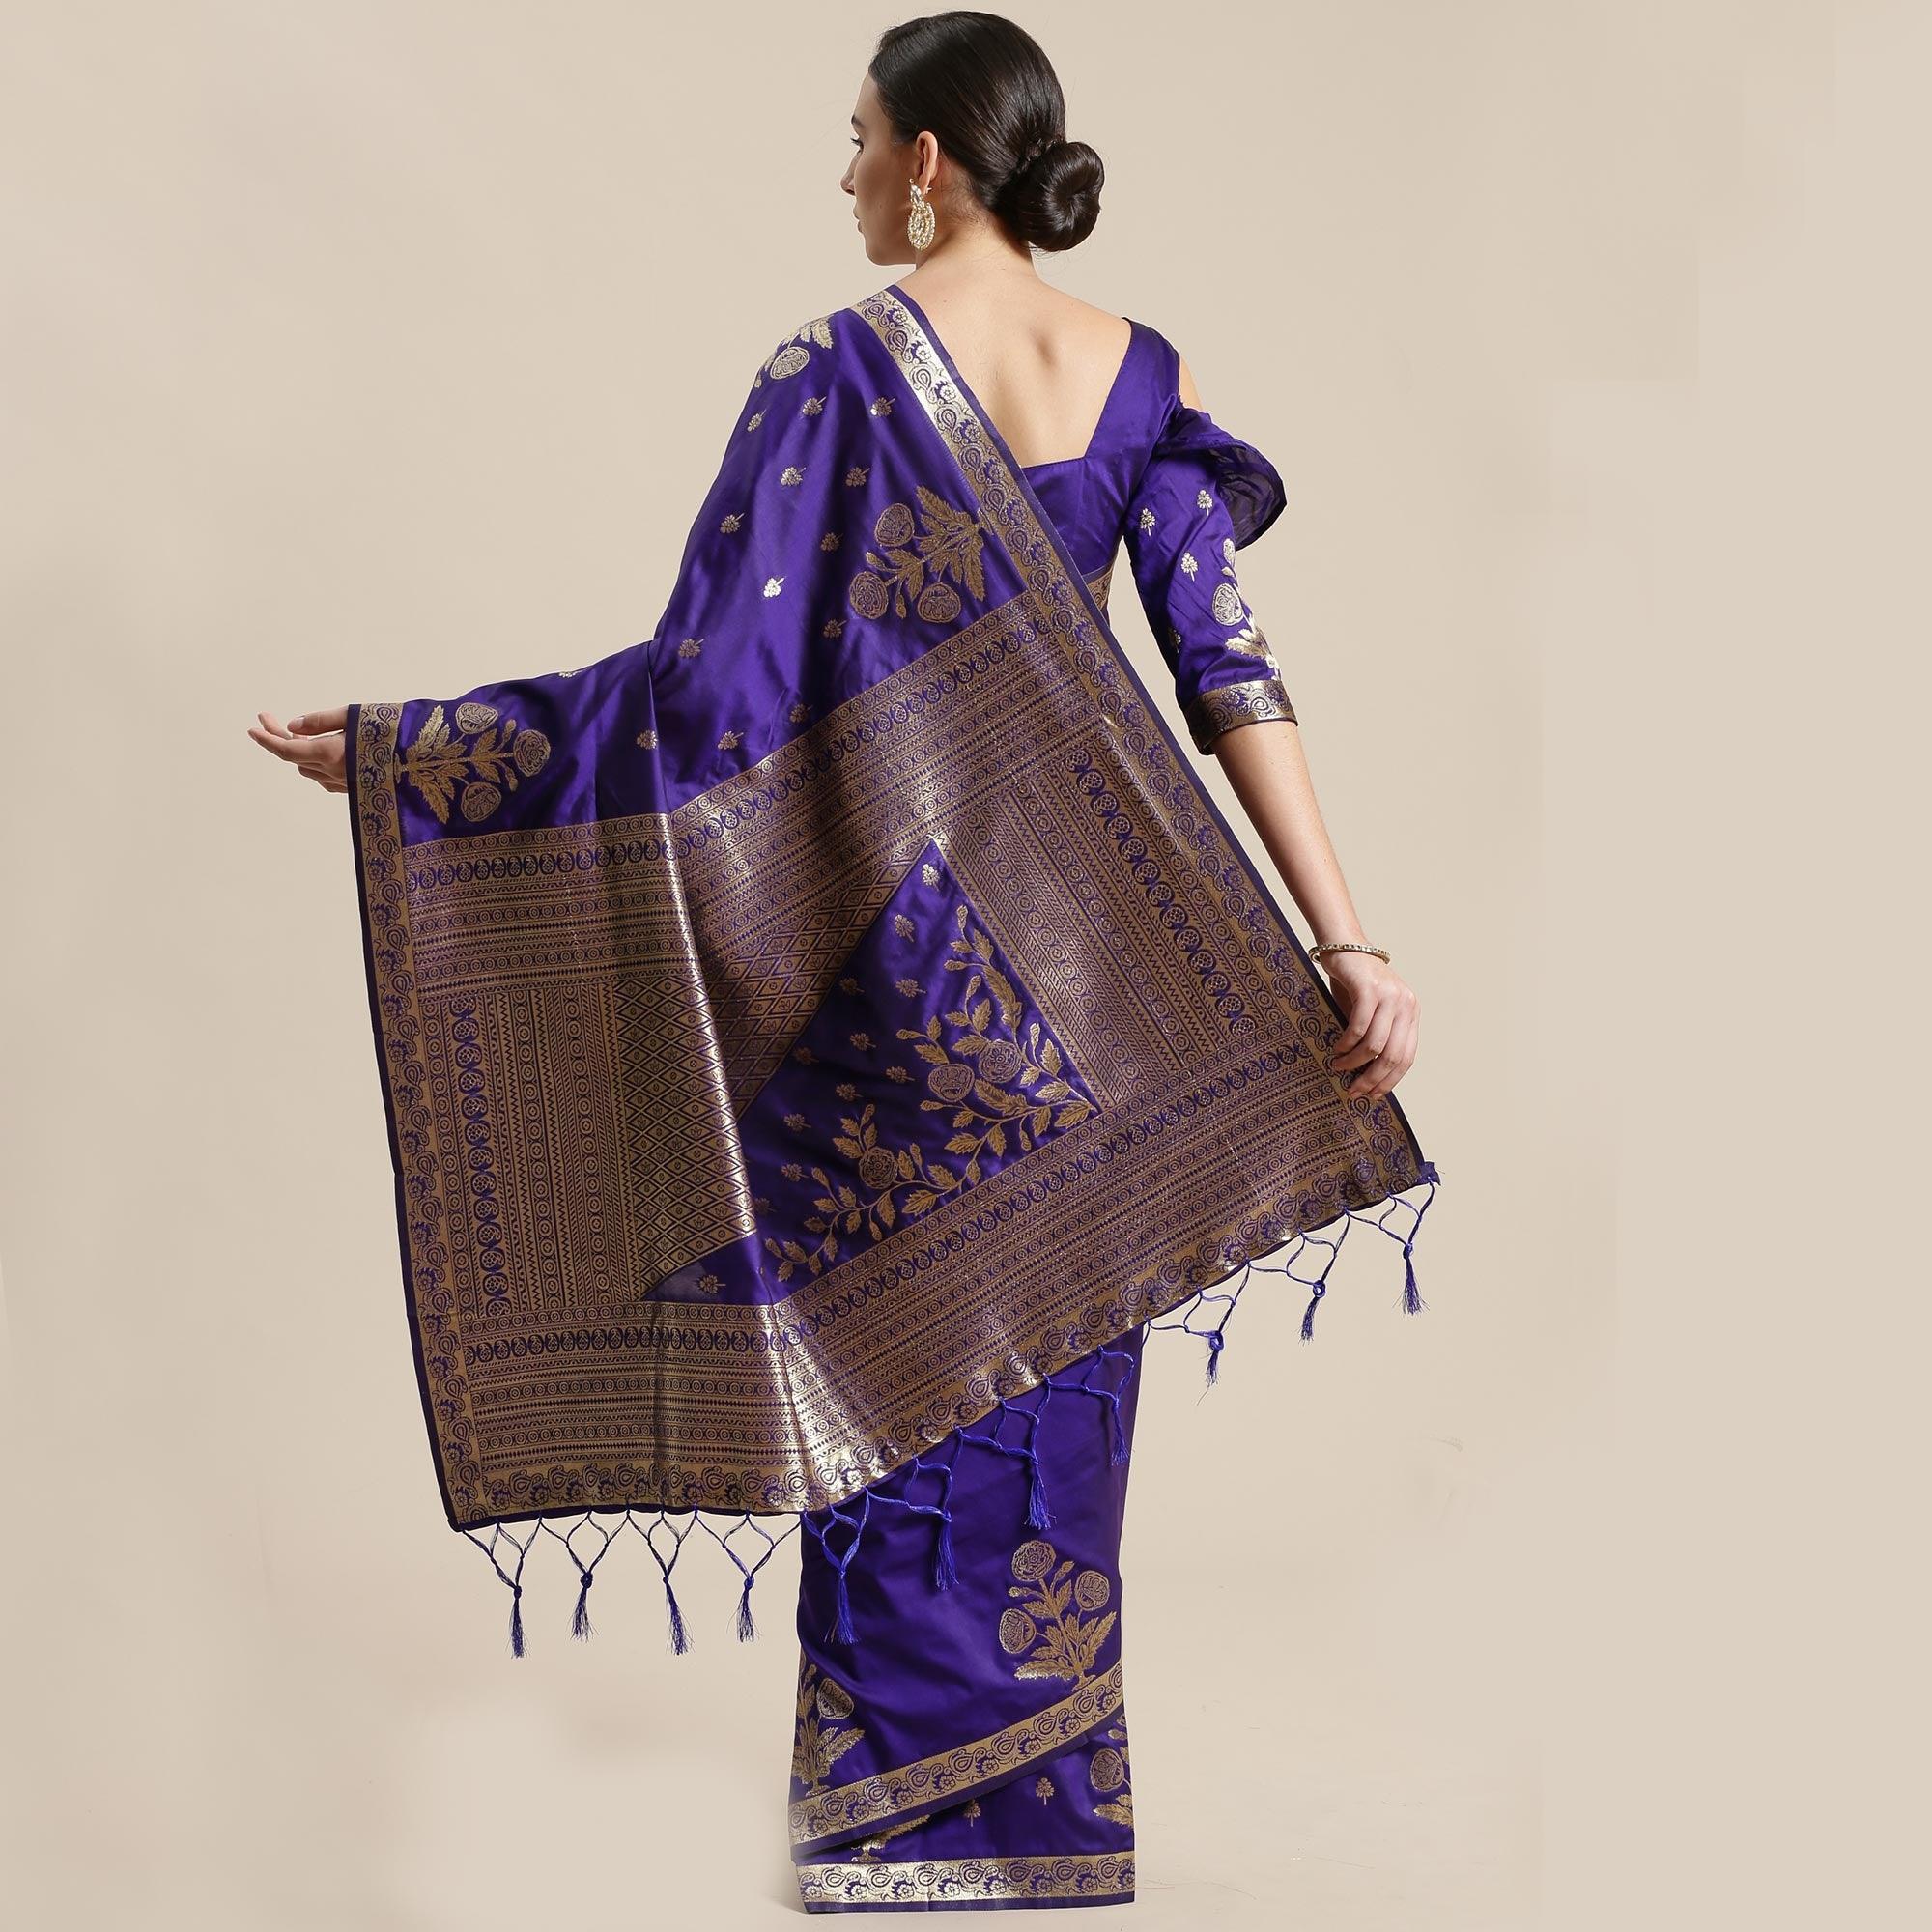 Captivating Blue Colored Festive Wear Silk Blend Woven Floral Saree With Tassels - Peachmode